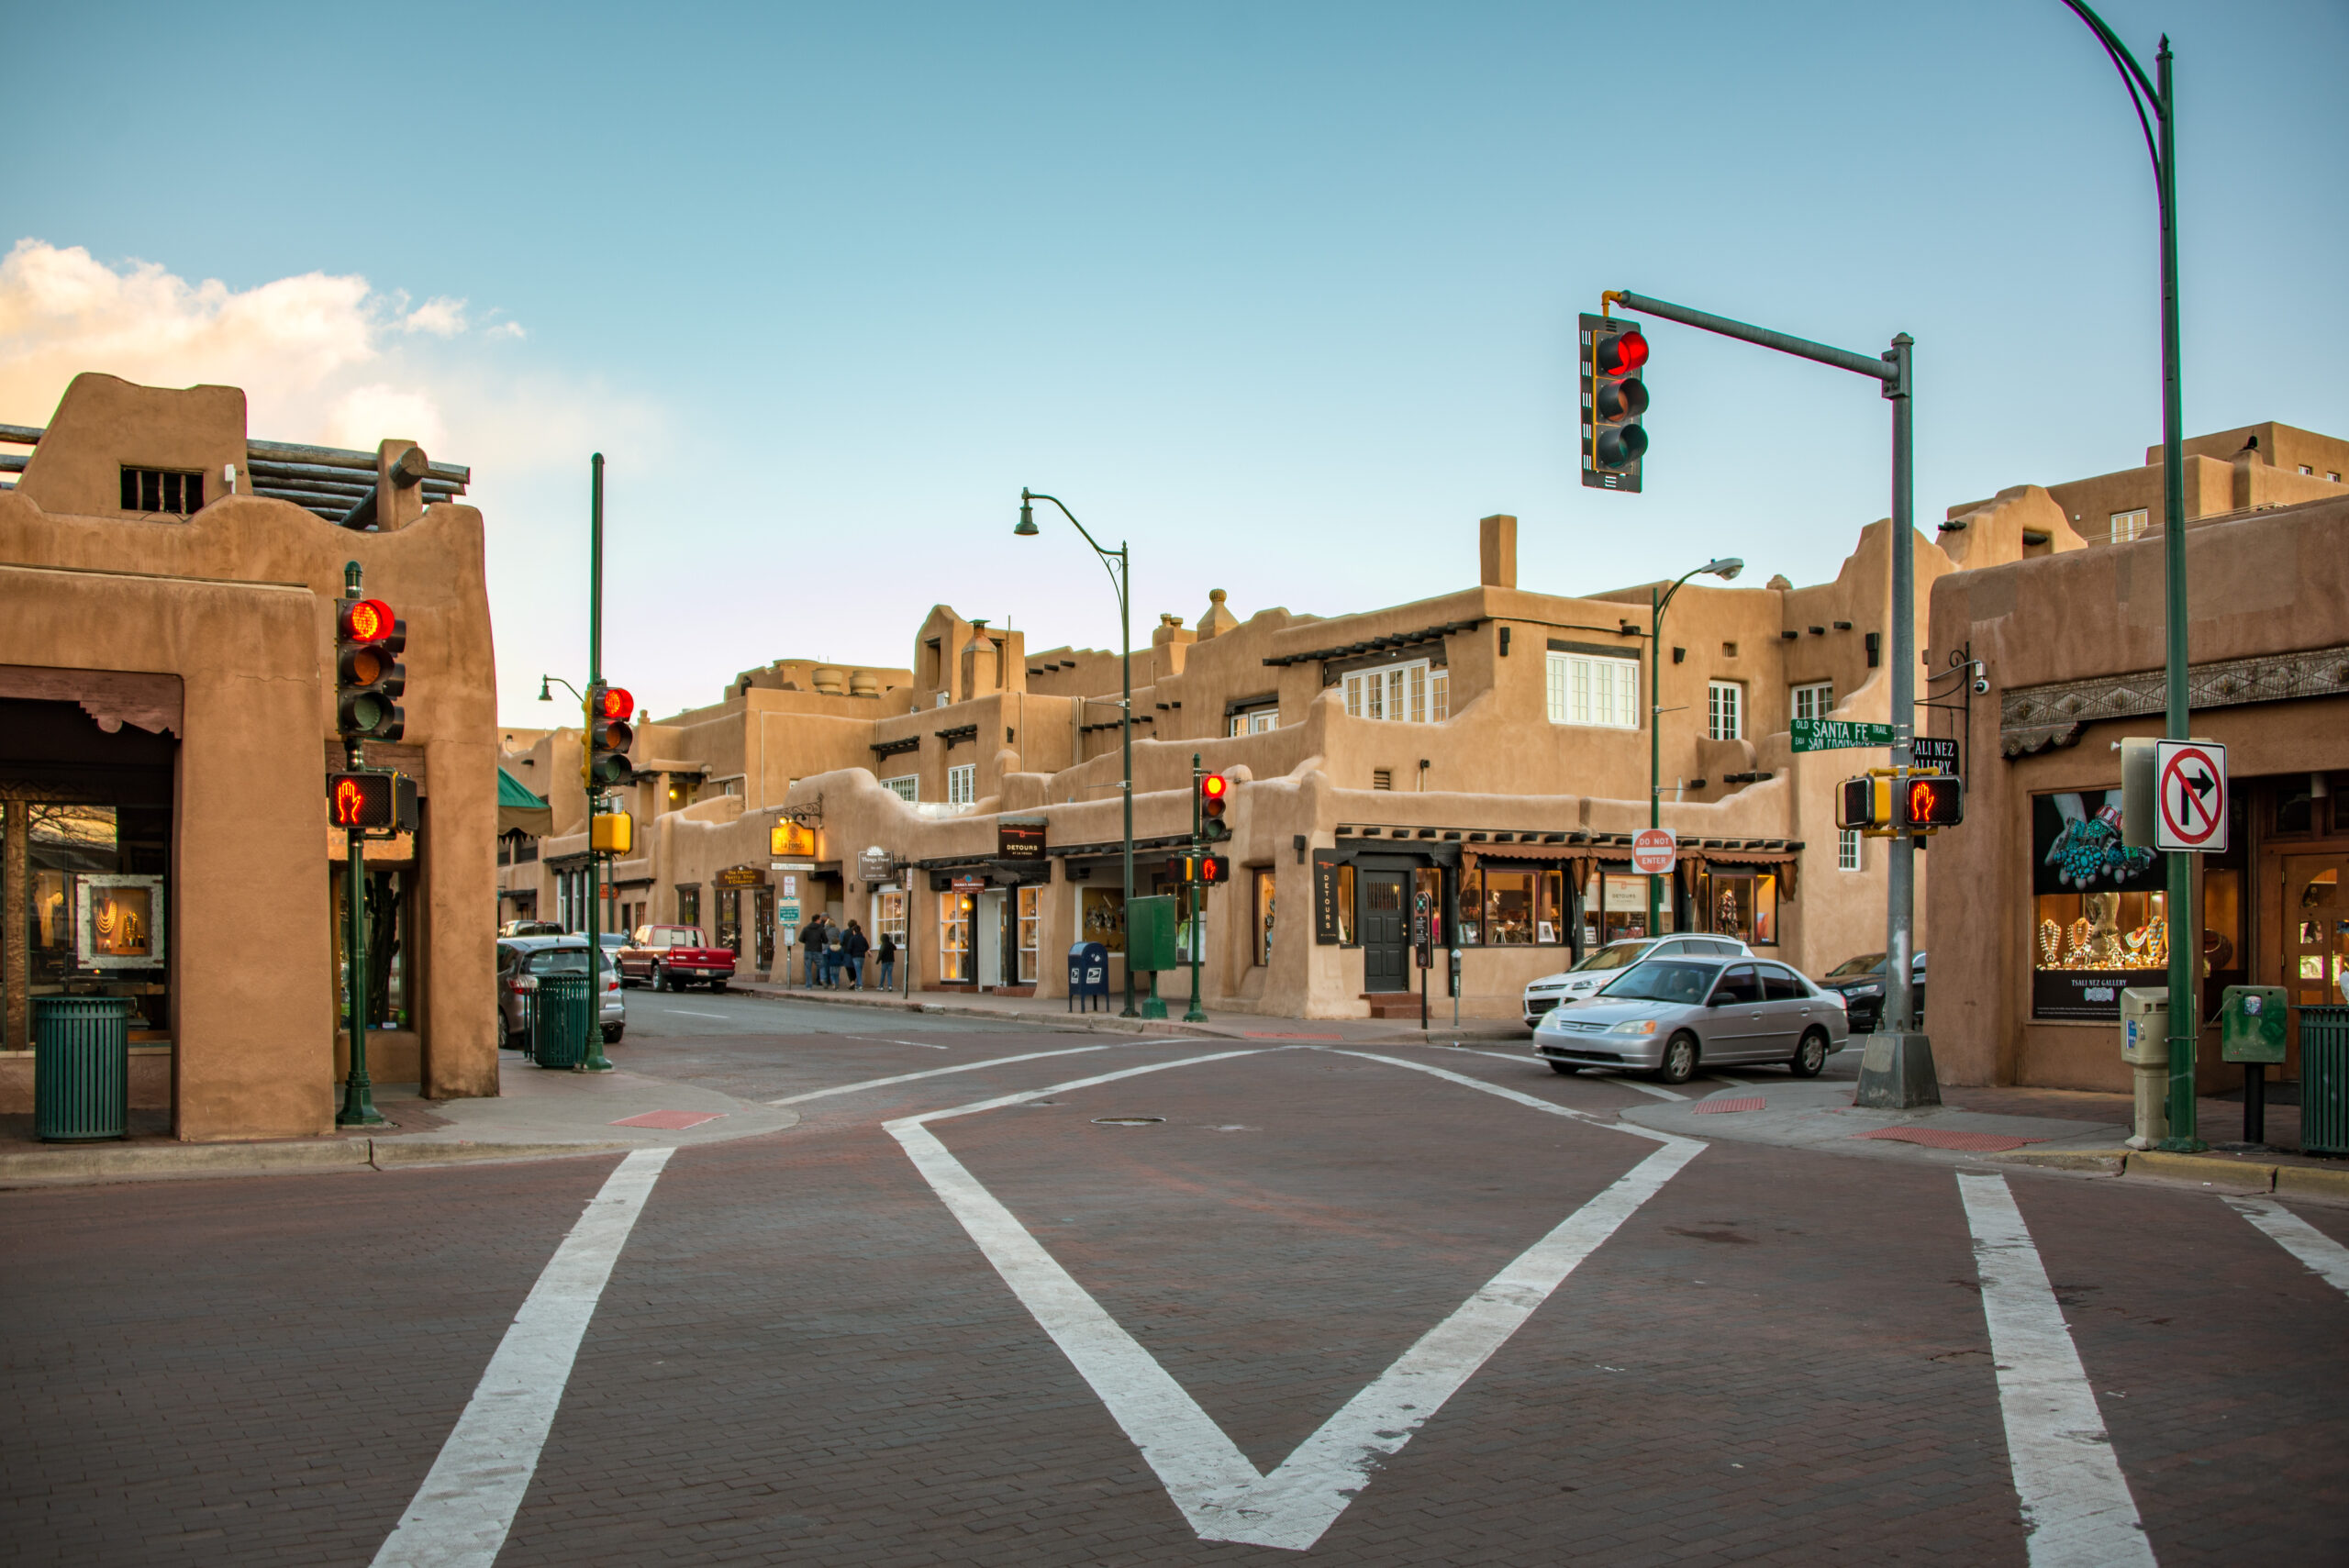 15 Facts about Latino Well-Being in New Mexico